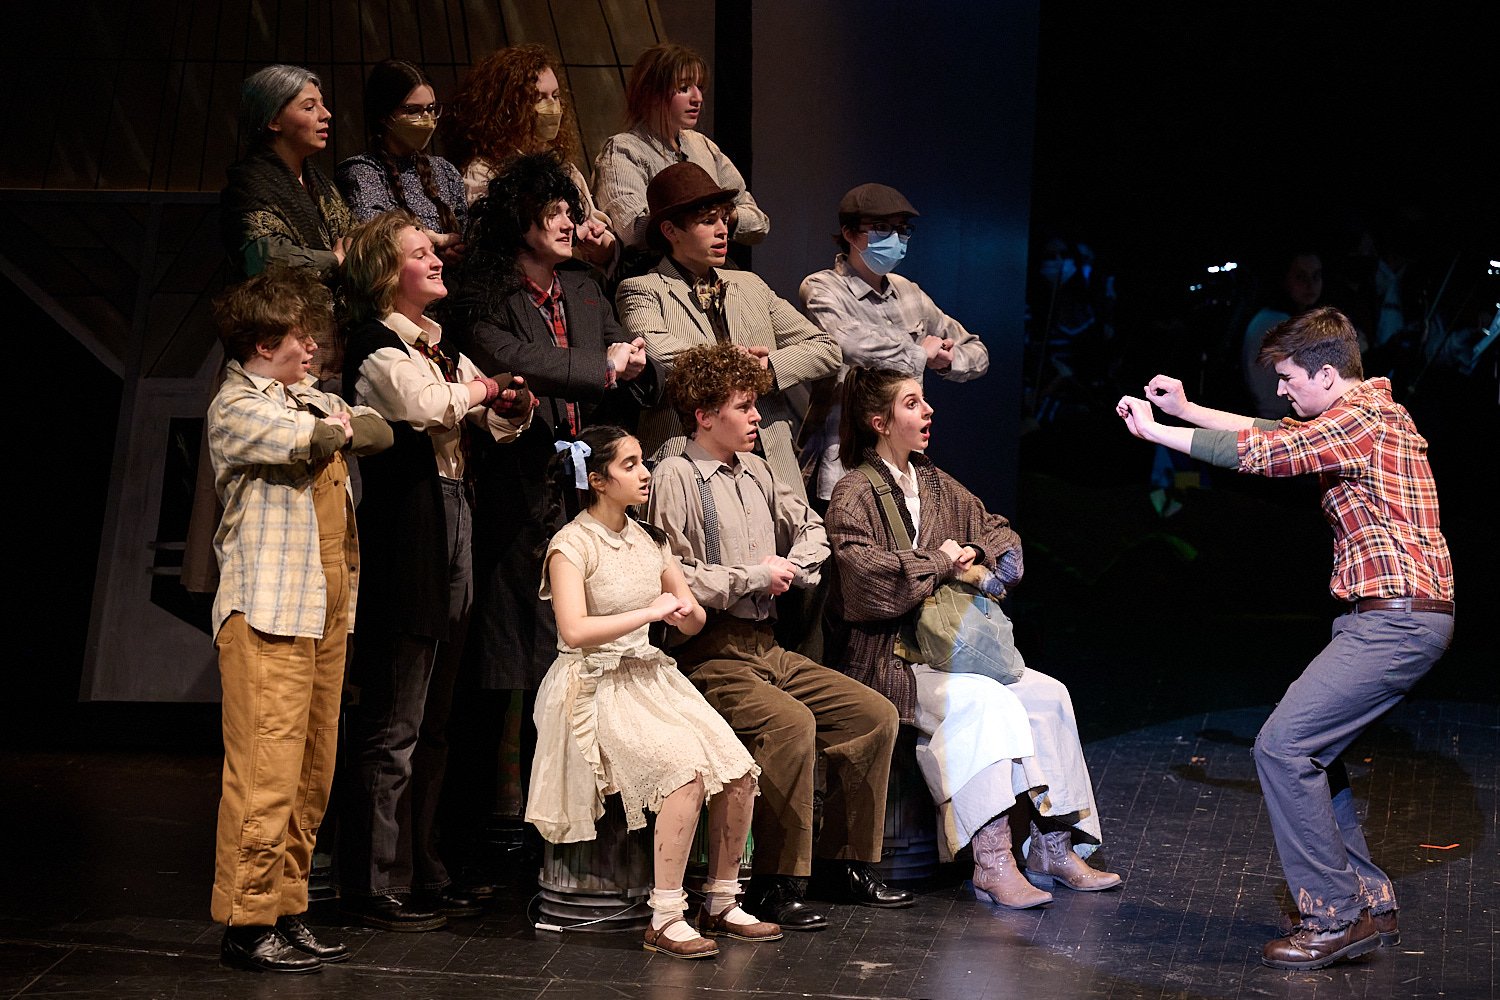  SEWICKLEY, PA, USA - MARCH 2ND 2022: High School students of Sewickley Academy are performing in an annual musical show “Urinetown” running on March 3rd-5th 2022. Kayla Hall 